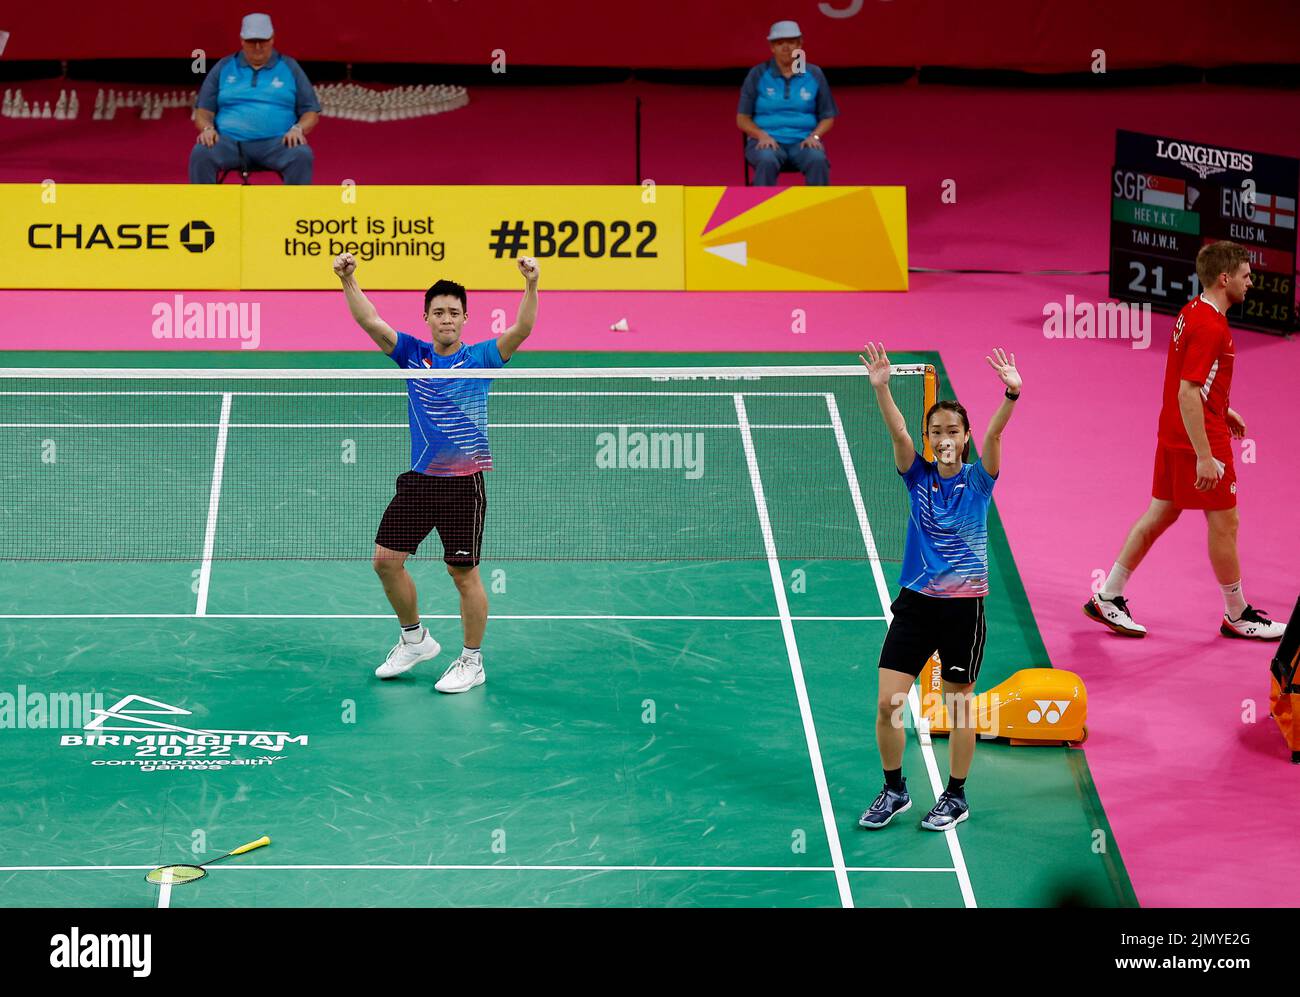 Commonwealth Games - Badminton - Mixed Doubles - Gold Medal Match -The NEC Hall 5, Birmingham, Britain - August 8, 2022 Singapore's Yong Kai Terry Hee and Jessica Wei Han Tan celebrate winning gold against England's Marcus Ellis and Lauren Smith REUTERS/Jason Cairnduff Stock Photo